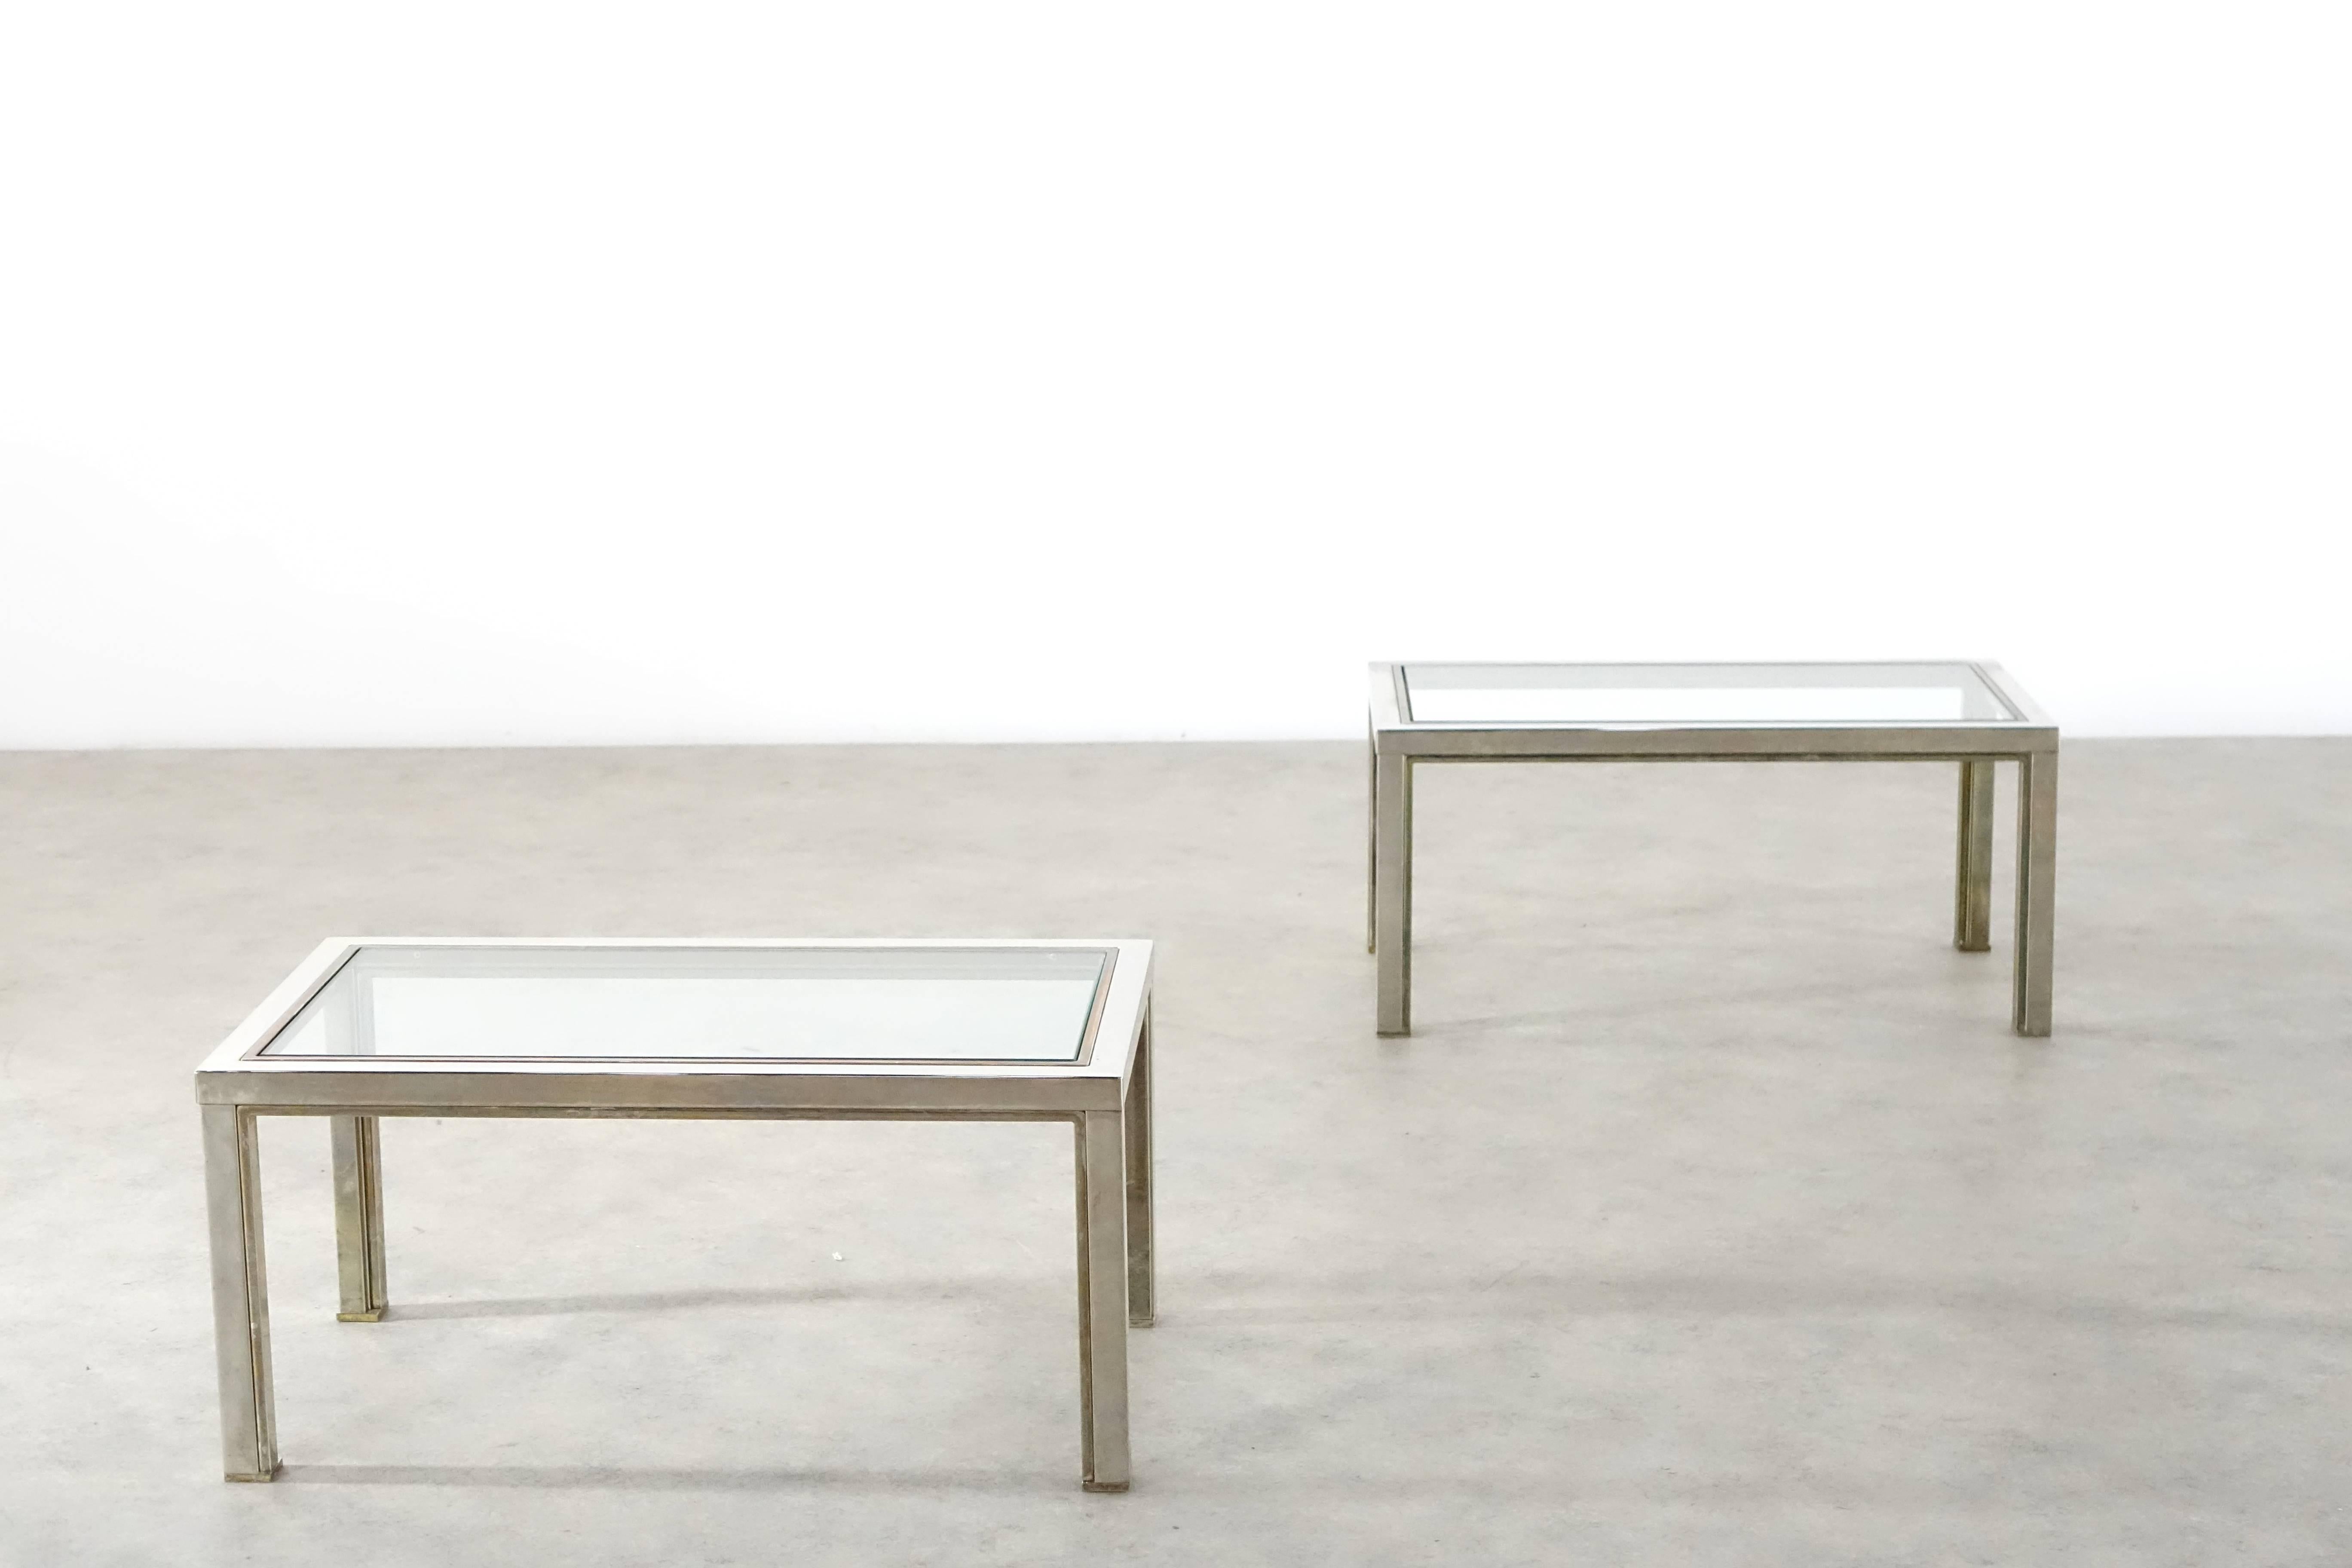 Bicolor Romeo Rega Coffee Table and Side Tables, France im Zustand „Gut“ in Munster, NRW